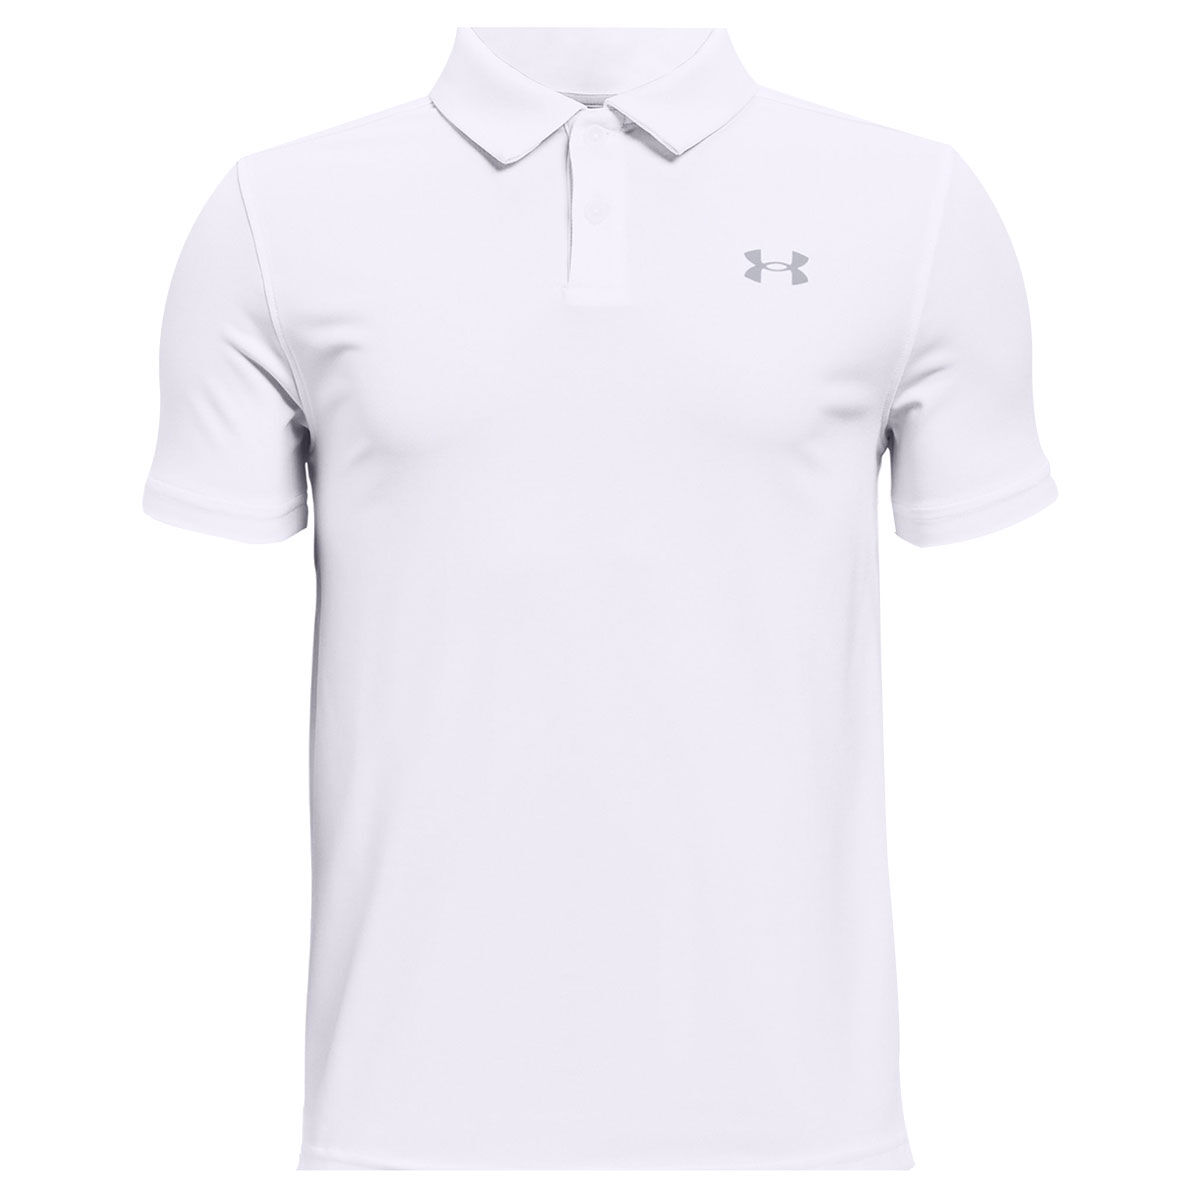 Image of Under Armour Junior Polo-Shirt Performance Unisex White/grey/grey 6-7 years | Online Golf